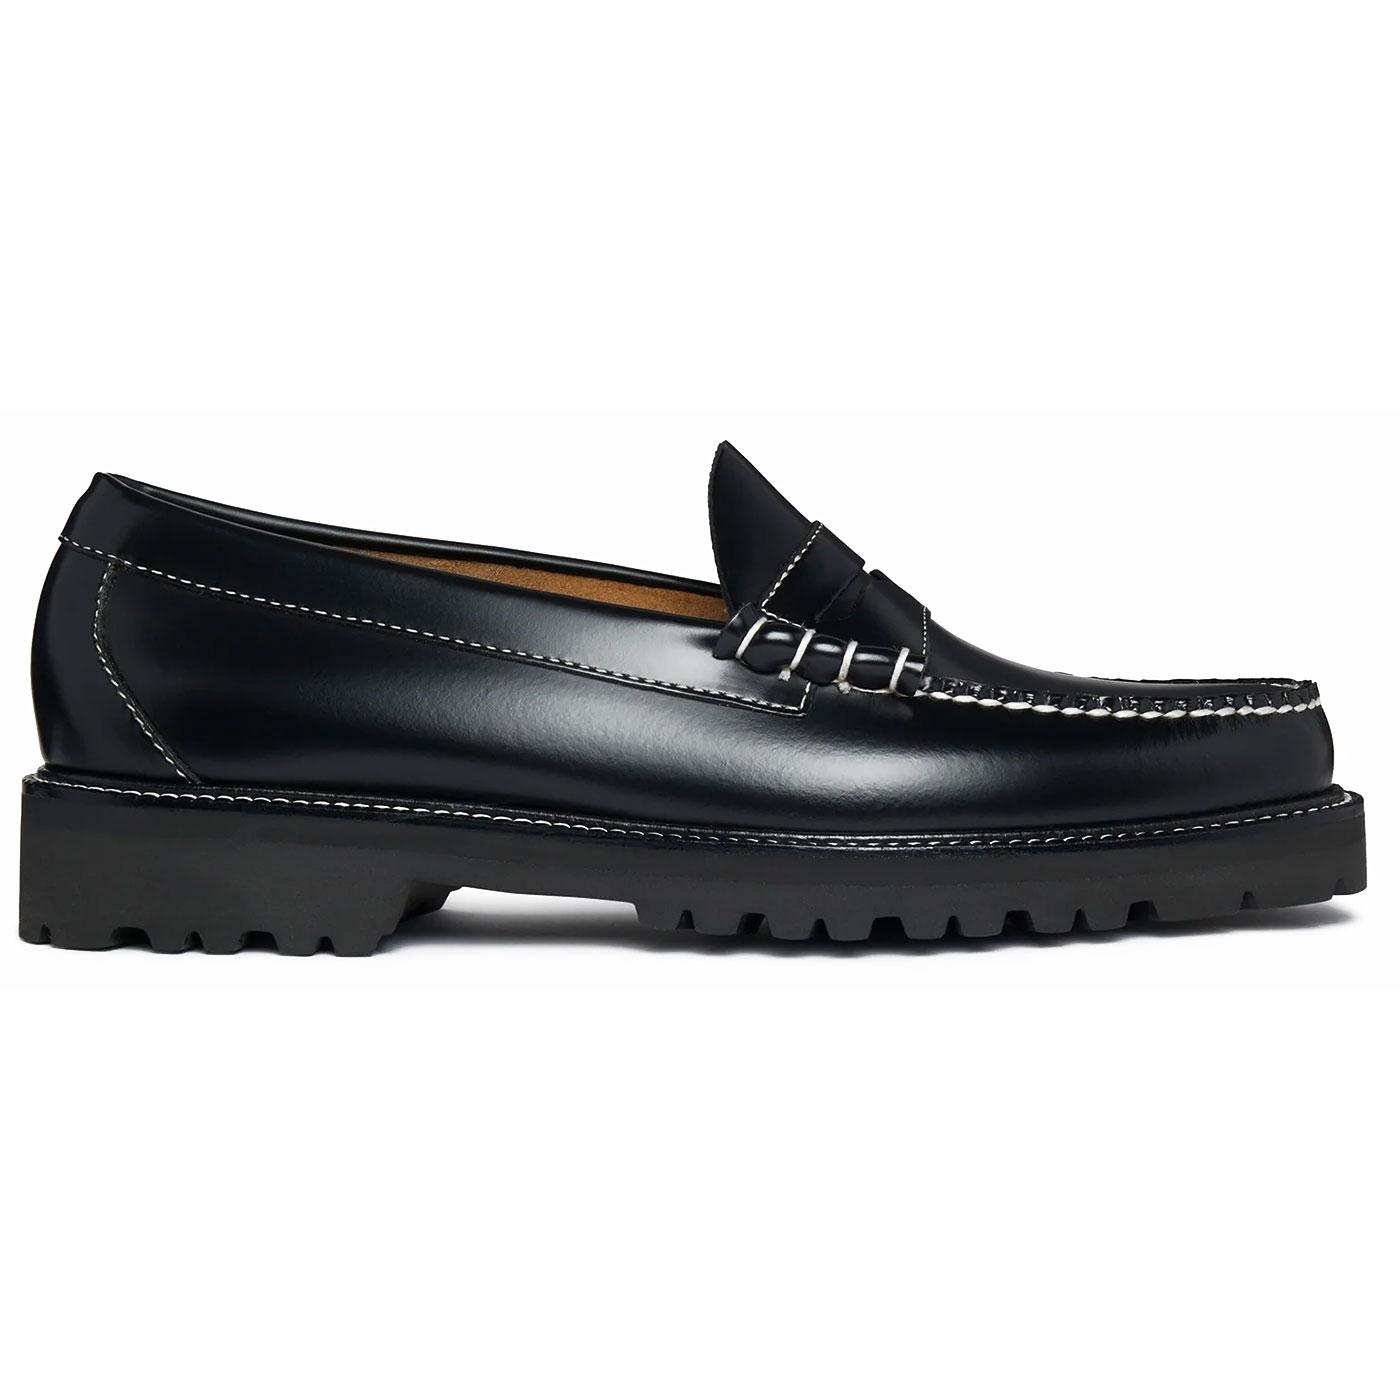 90s Larson Bass Weejuns Mod Leather Penny Loafers 